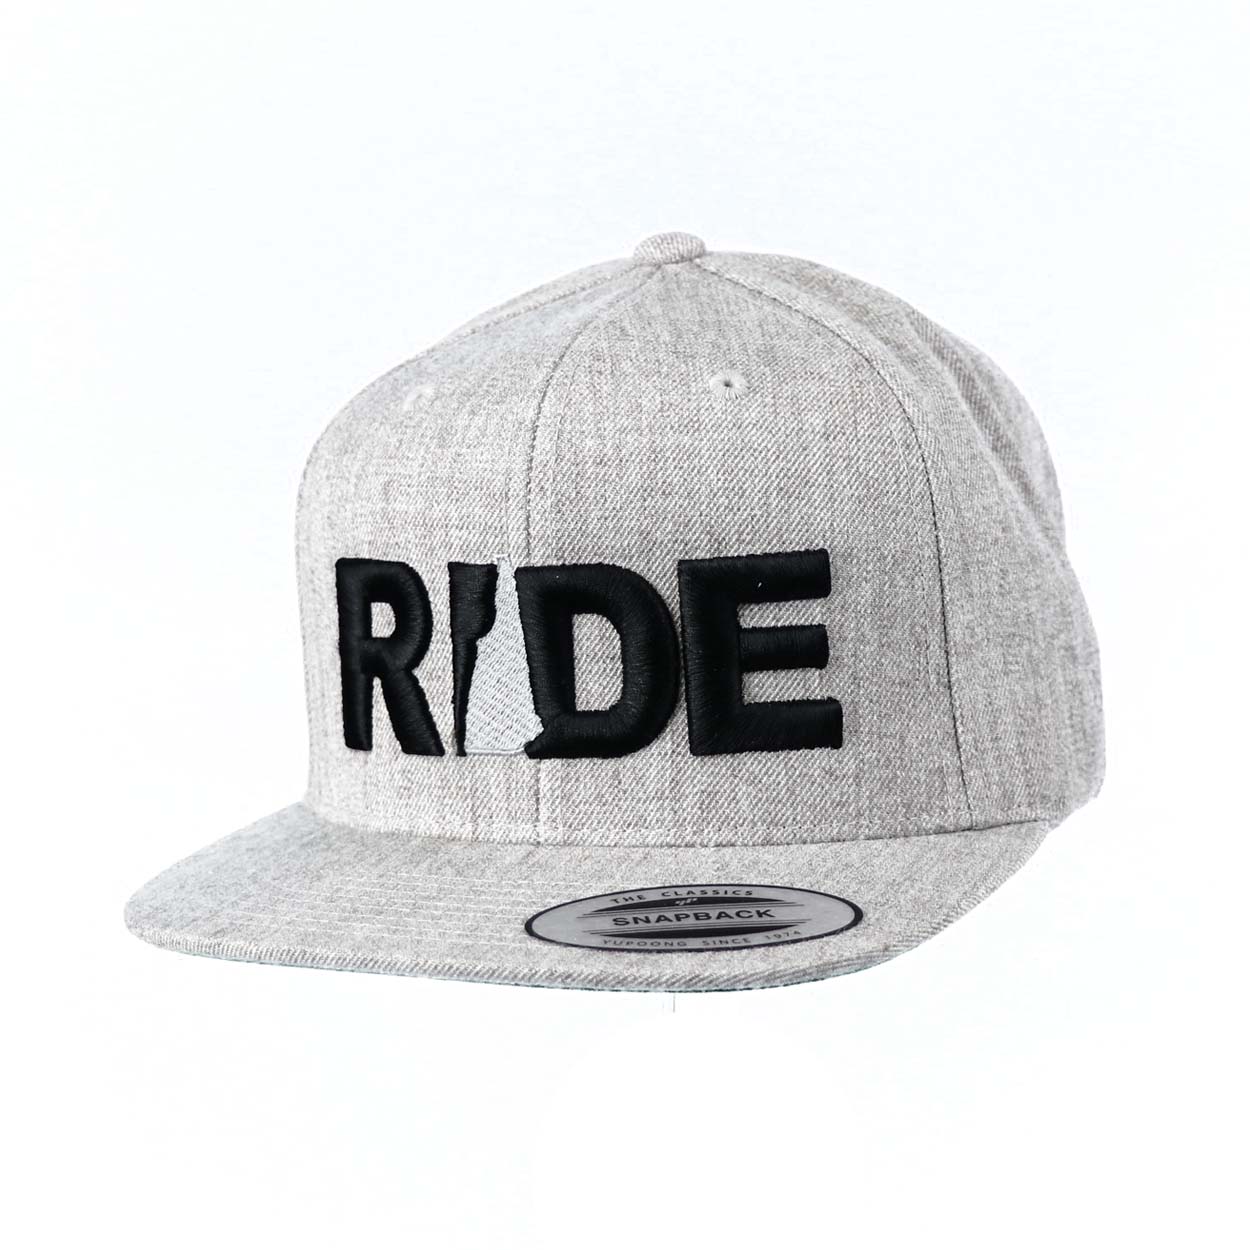 Ride New Hampshire Classic Pro 3D Puff Embroidered Snapback Flat Brim Hat Heather Gray